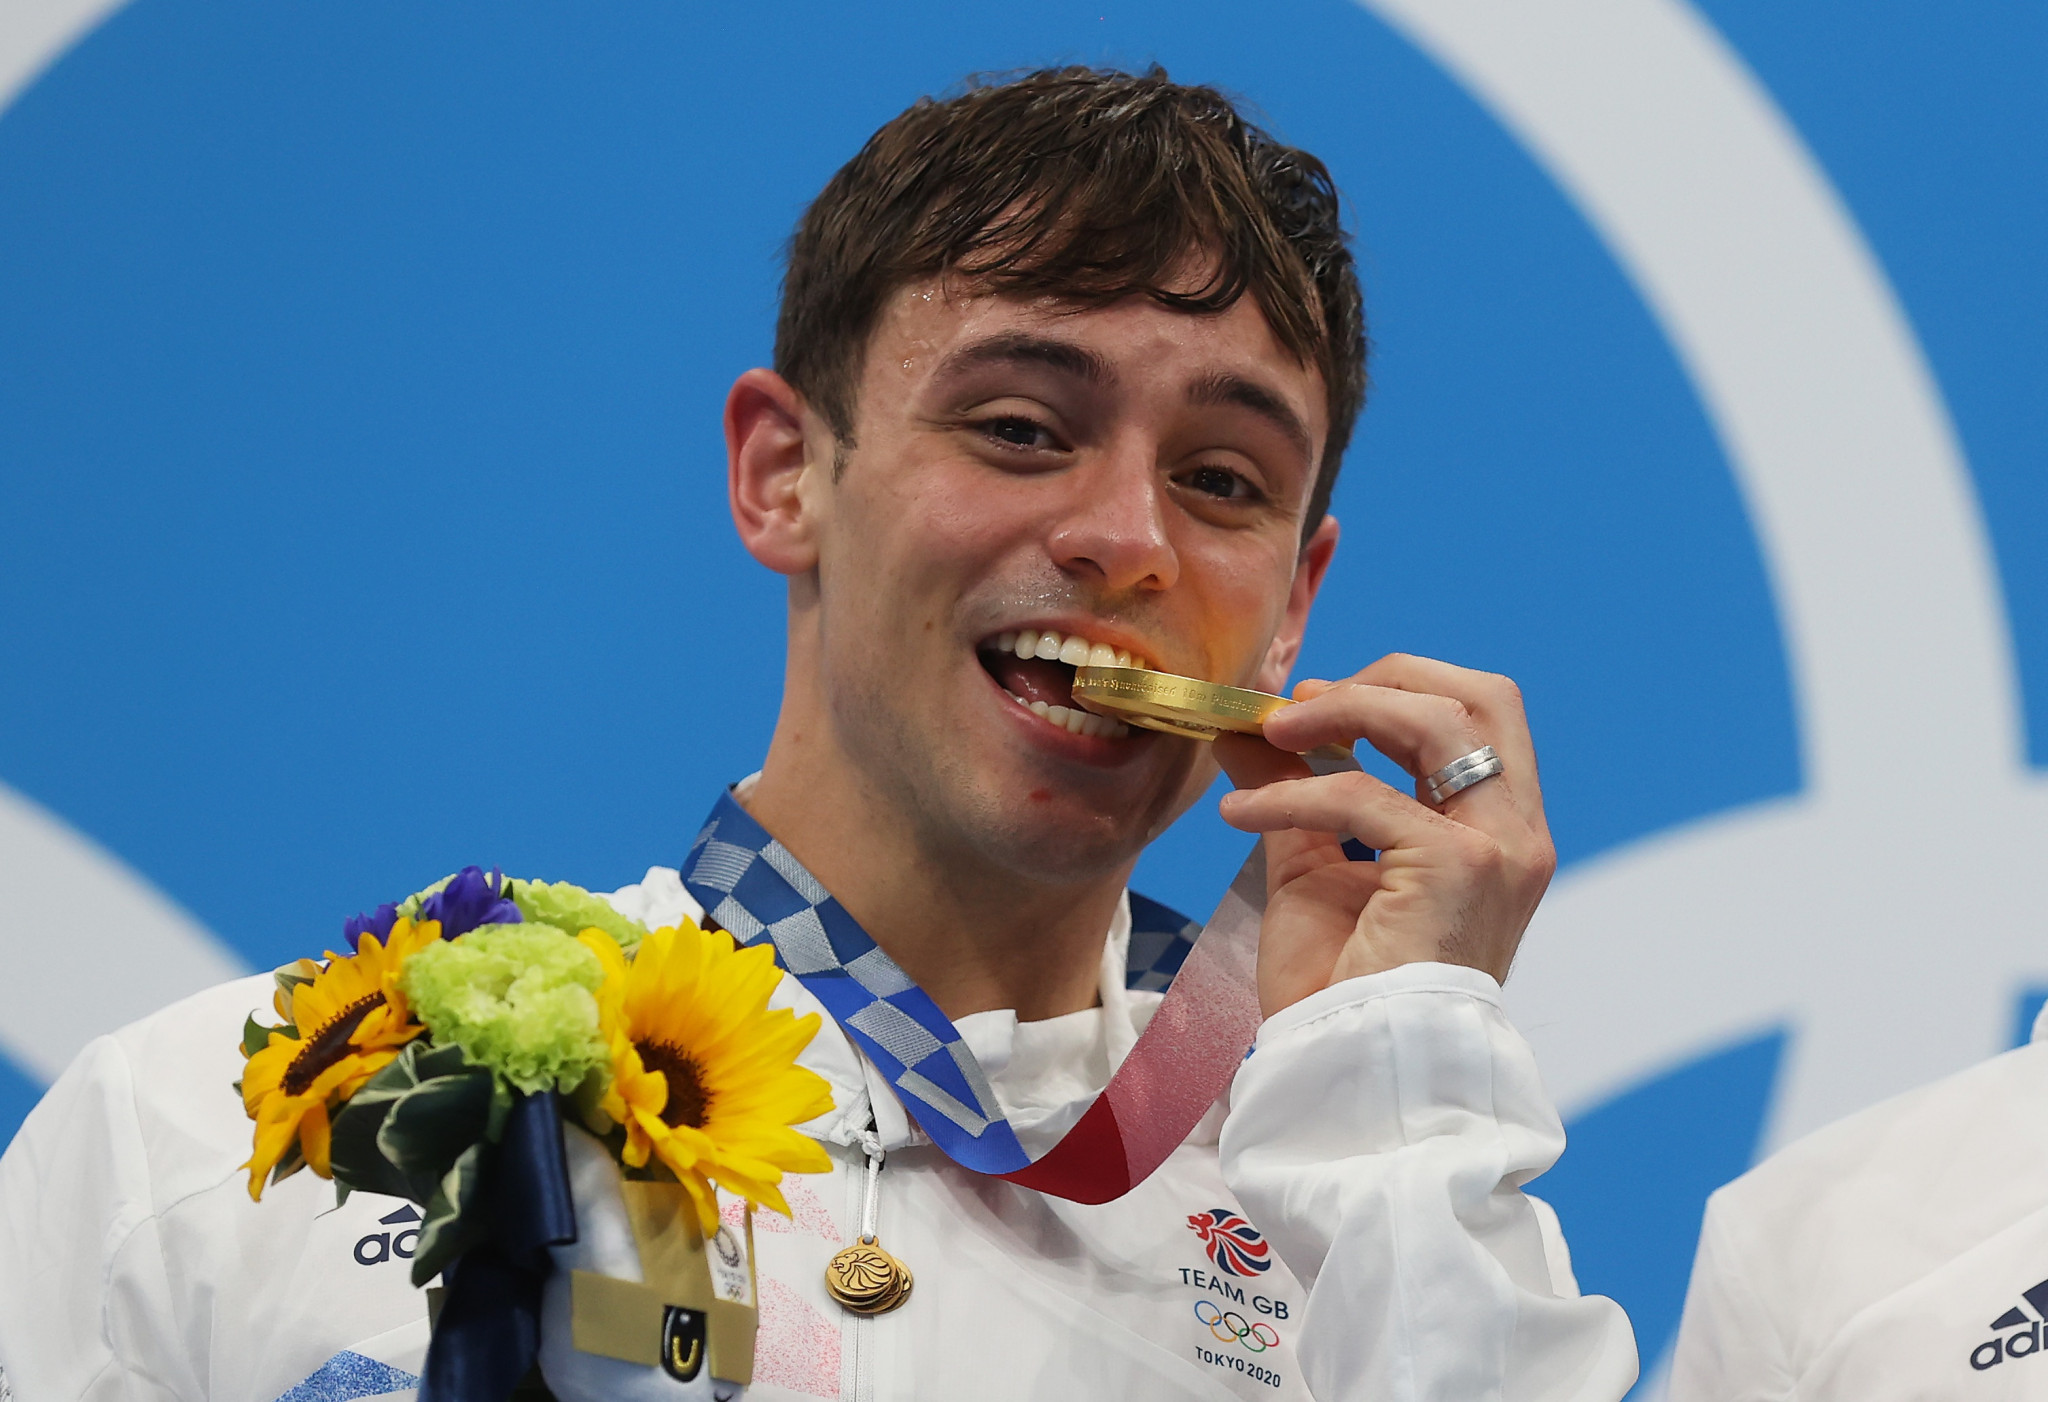 Olympic champion Daley feared for his life in COVID-19 ordeal just months before Olympics